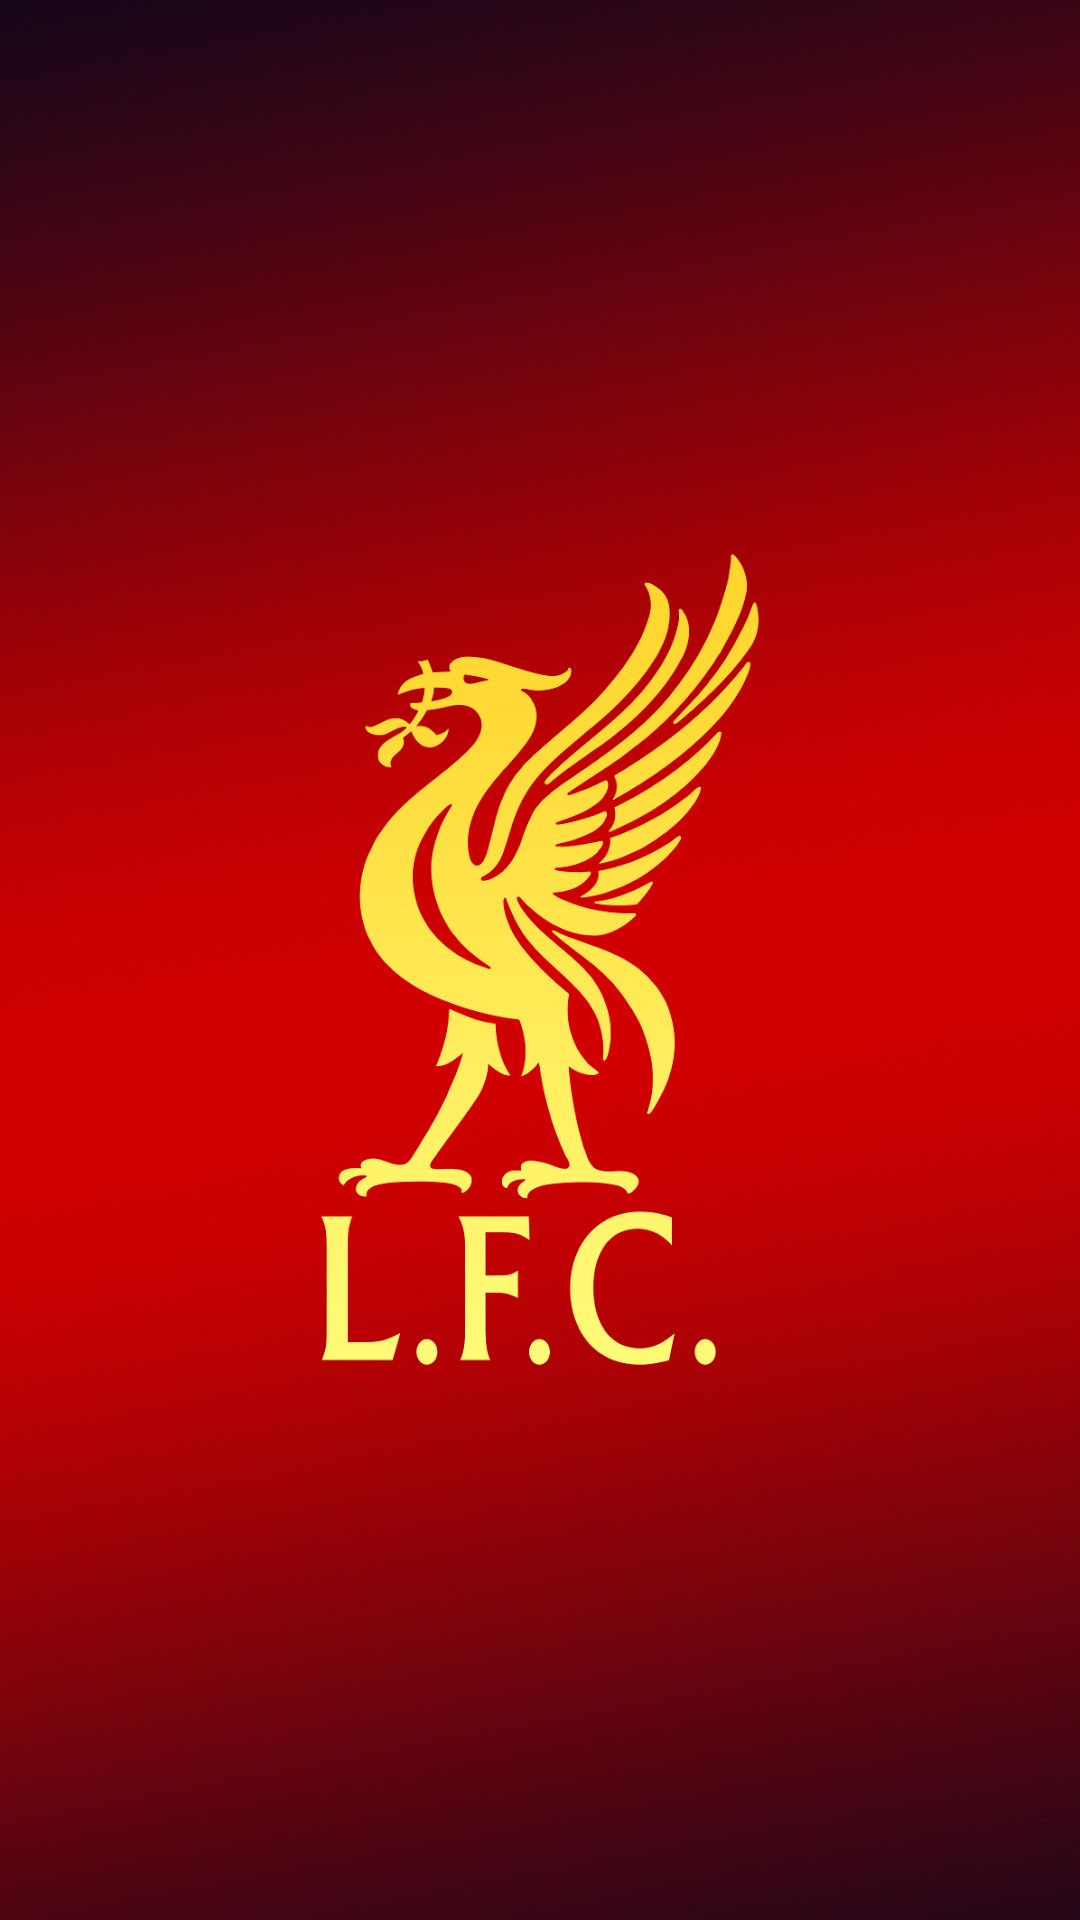 Ảnh nền Liverpool cho iphone, android